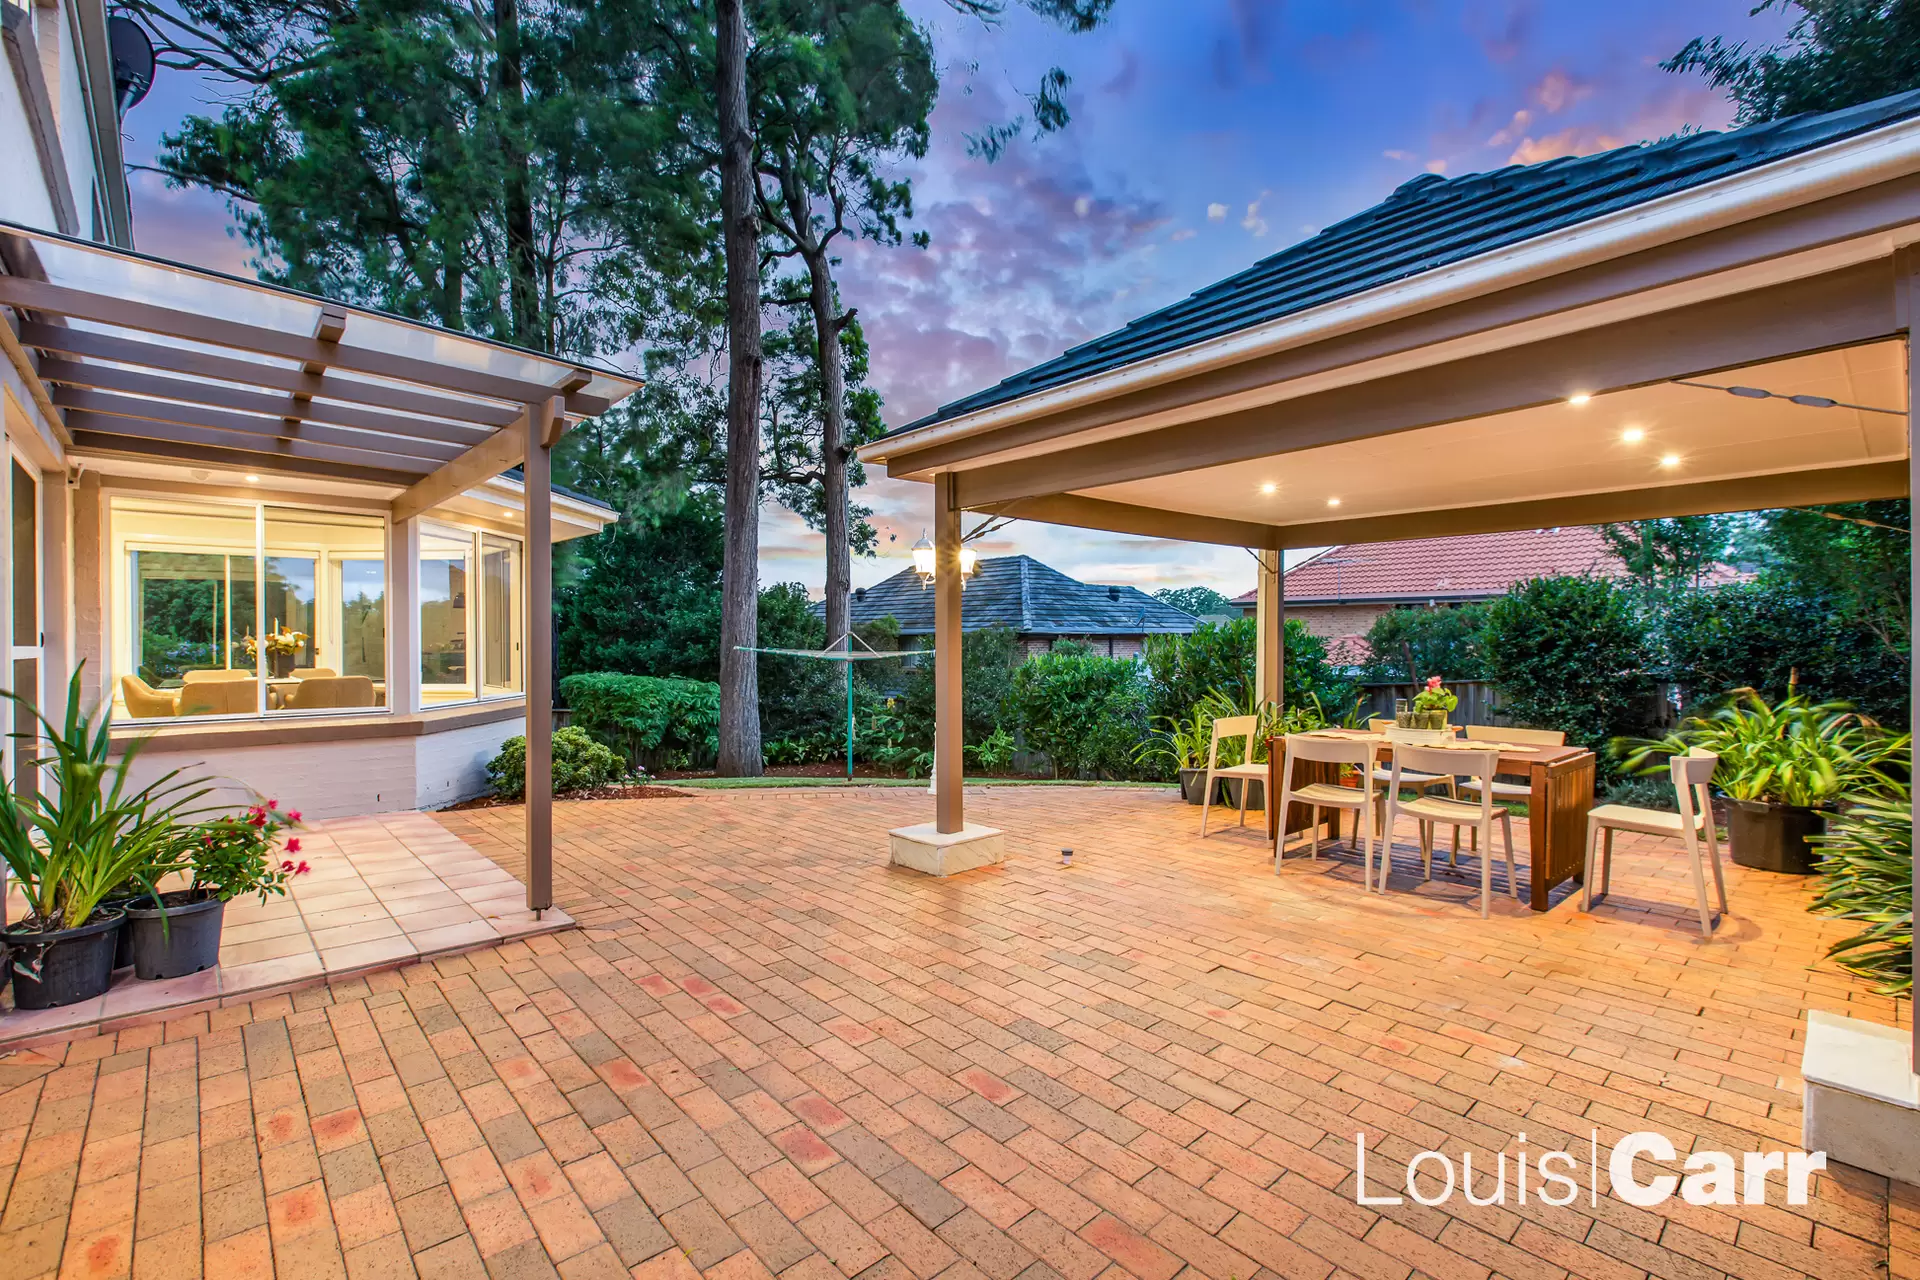 Photo #11: 138 Aiken Road, West Pennant Hills - For Sale by Louis Carr Real Estate